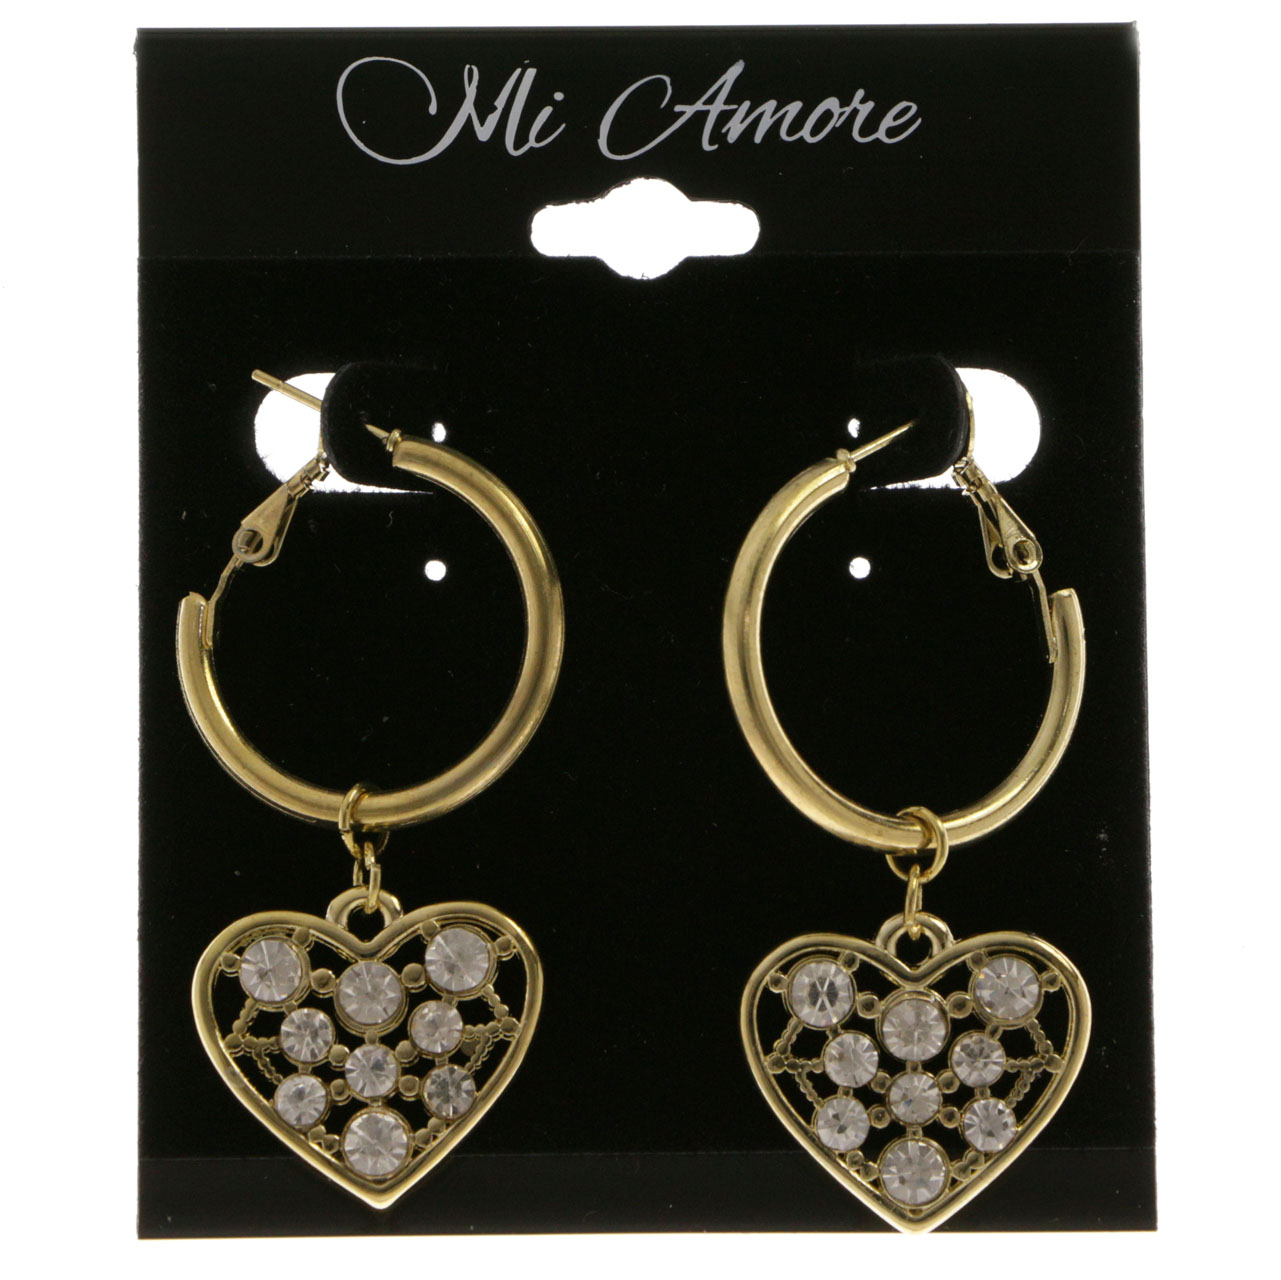 MI AMORE Gold-Tone Hoop-Earrings With Heart Shaped Charm and Crystal Accents 10E3537